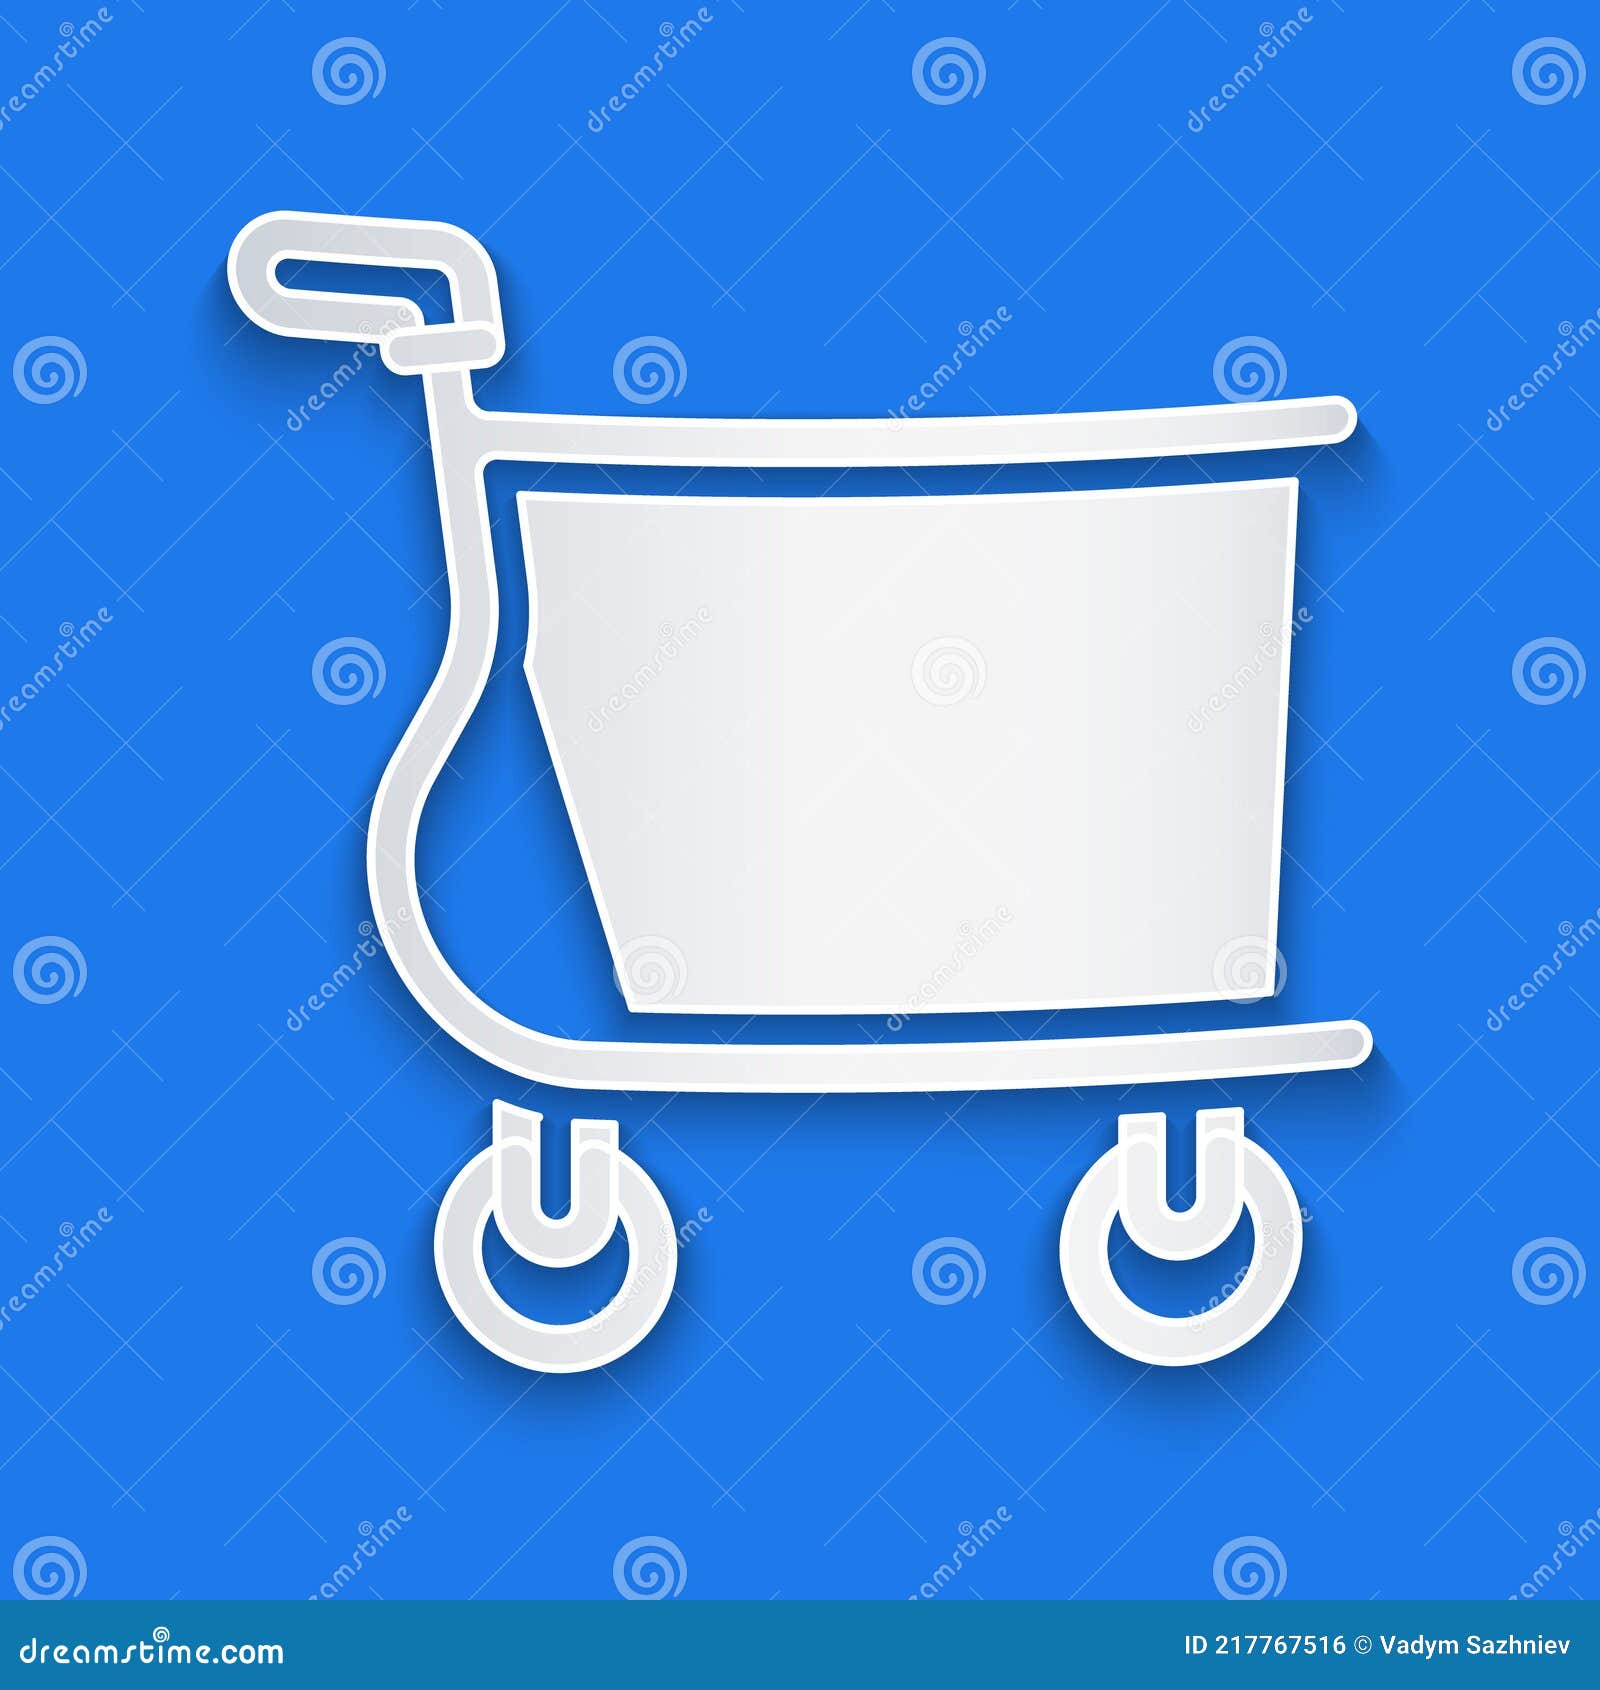 Paper Cut Shopping Cart Icon Isolated on Blue Background. Online Buying  Concept. Delivery Service Sign Stock Vector - Illustration of volumetric,  online: 217767516